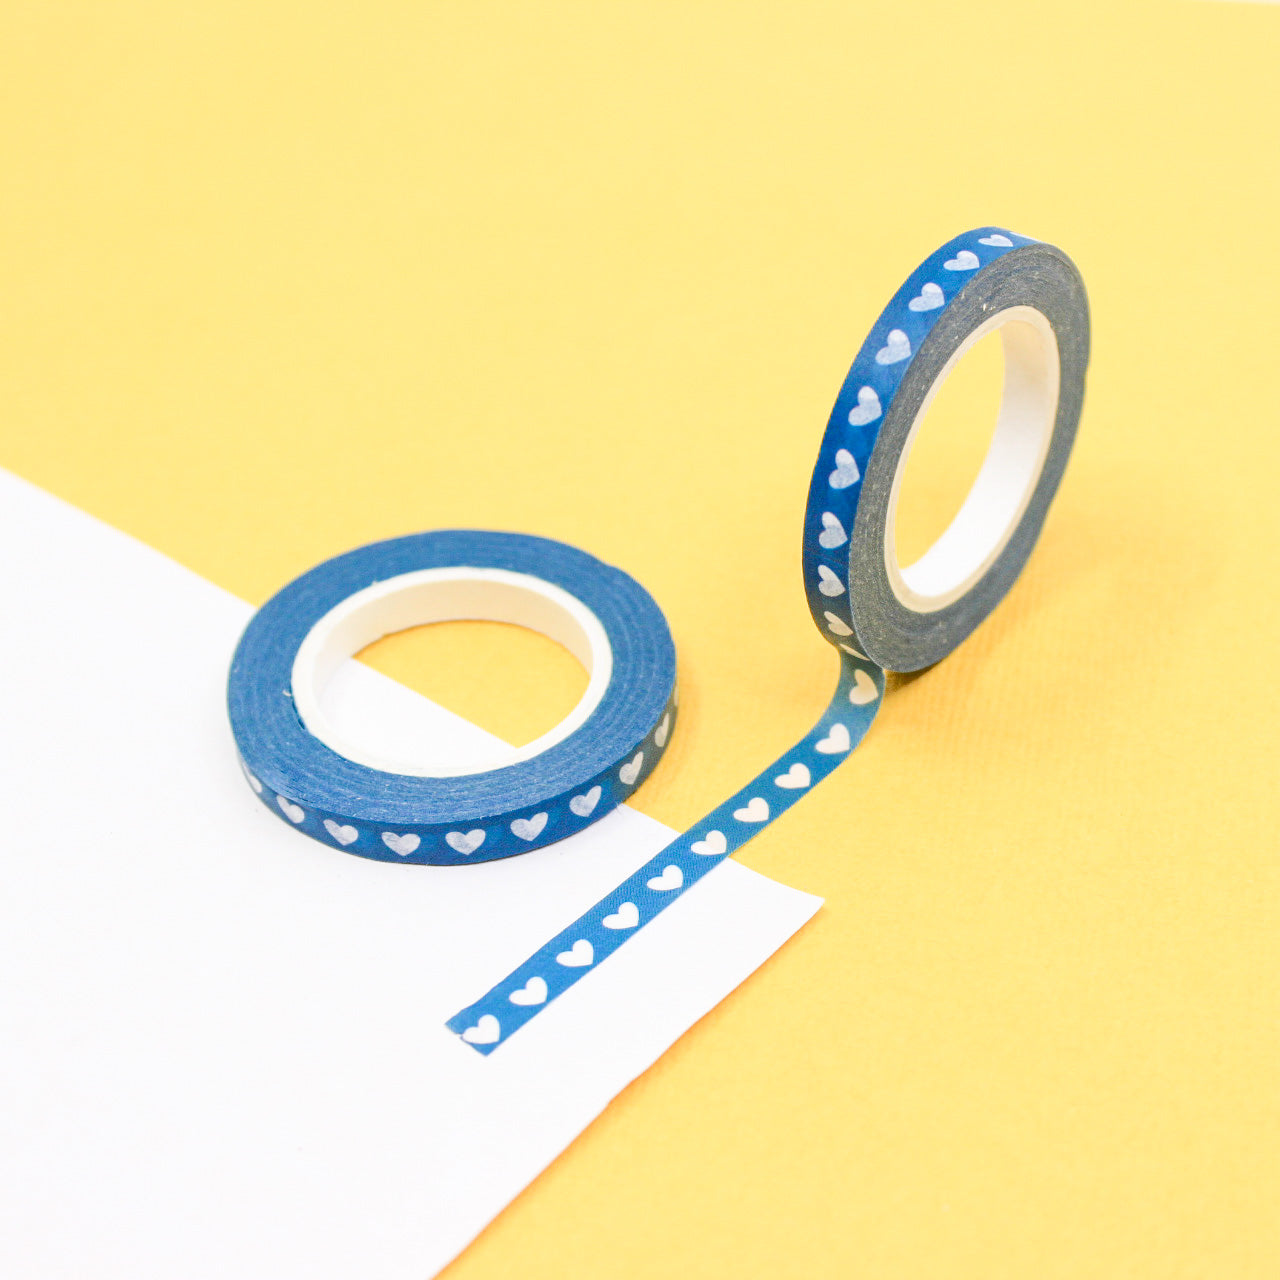 Elevate your crafts with our Narrow Blue Hearts Washi Tape, featuring a charming heart pattern in a calming shade of blue. Ideal for adding a sweet and decorative touch to your projects. This tape is sold at BBB Supplies Craft Shop.